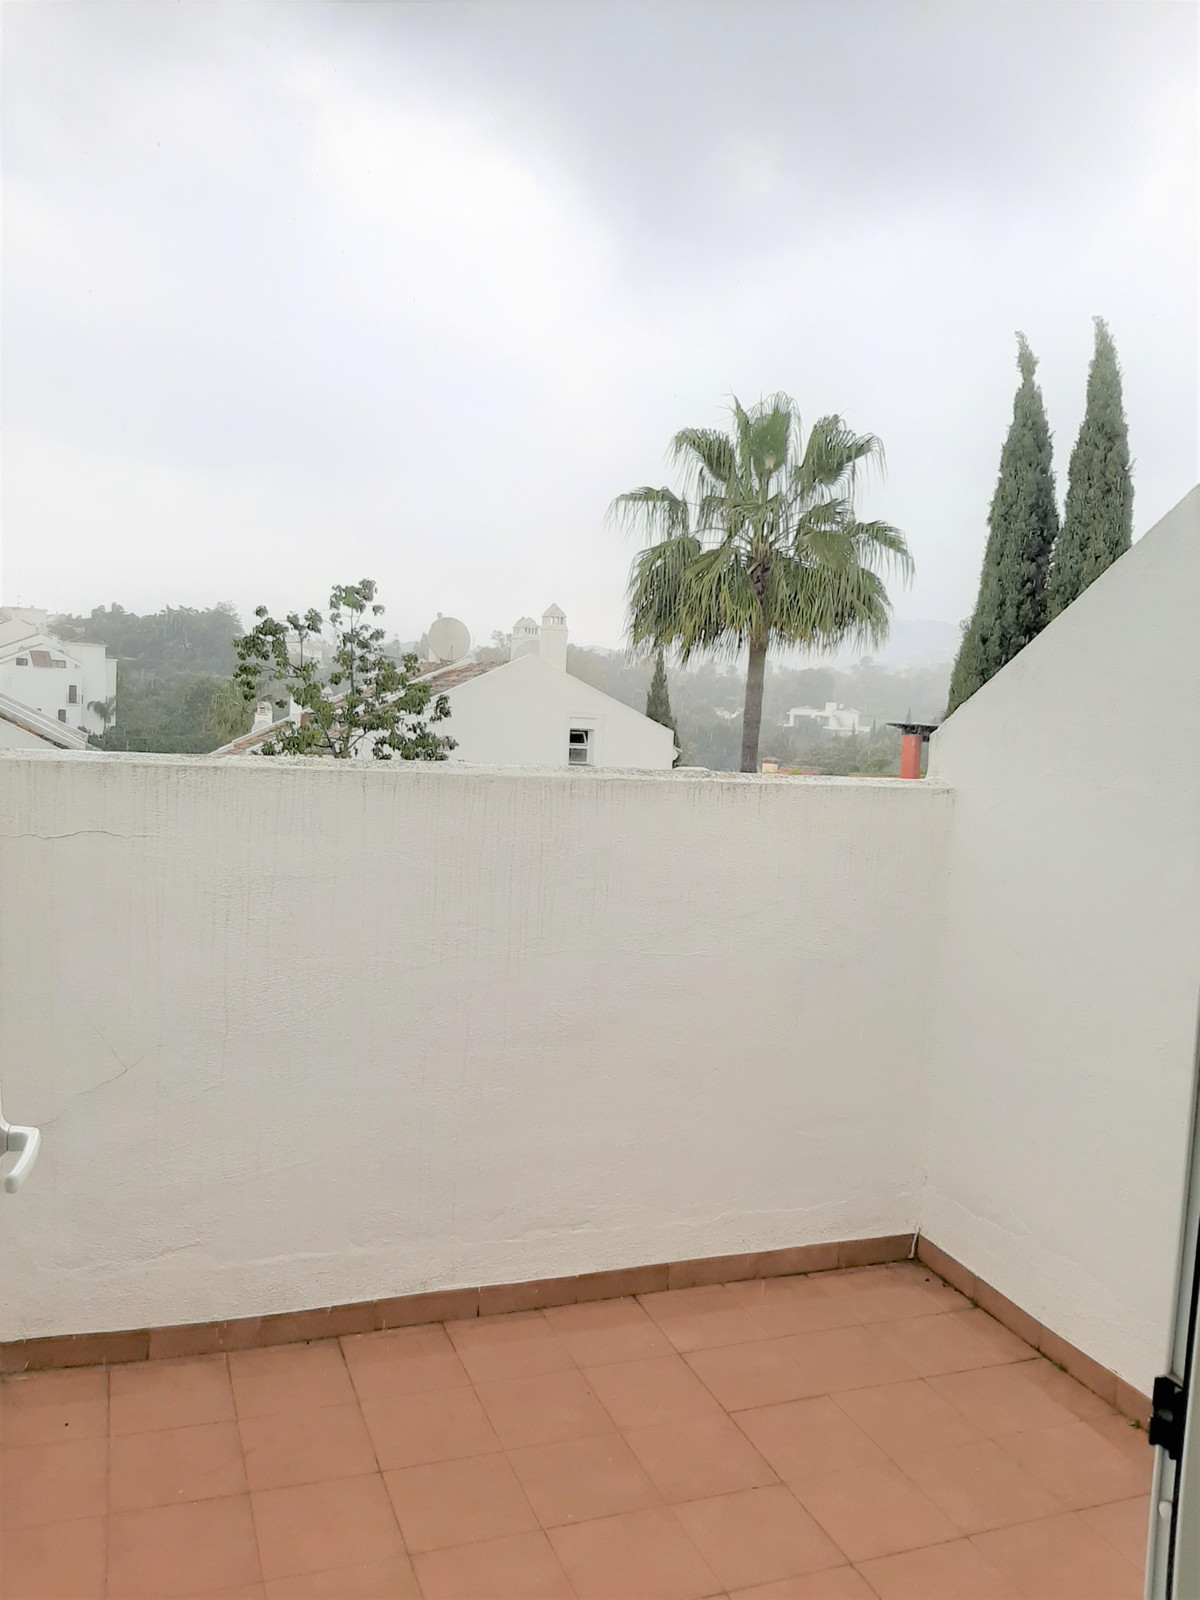 Townhouse Terraced in The Golden Mile, Costa del Sol
